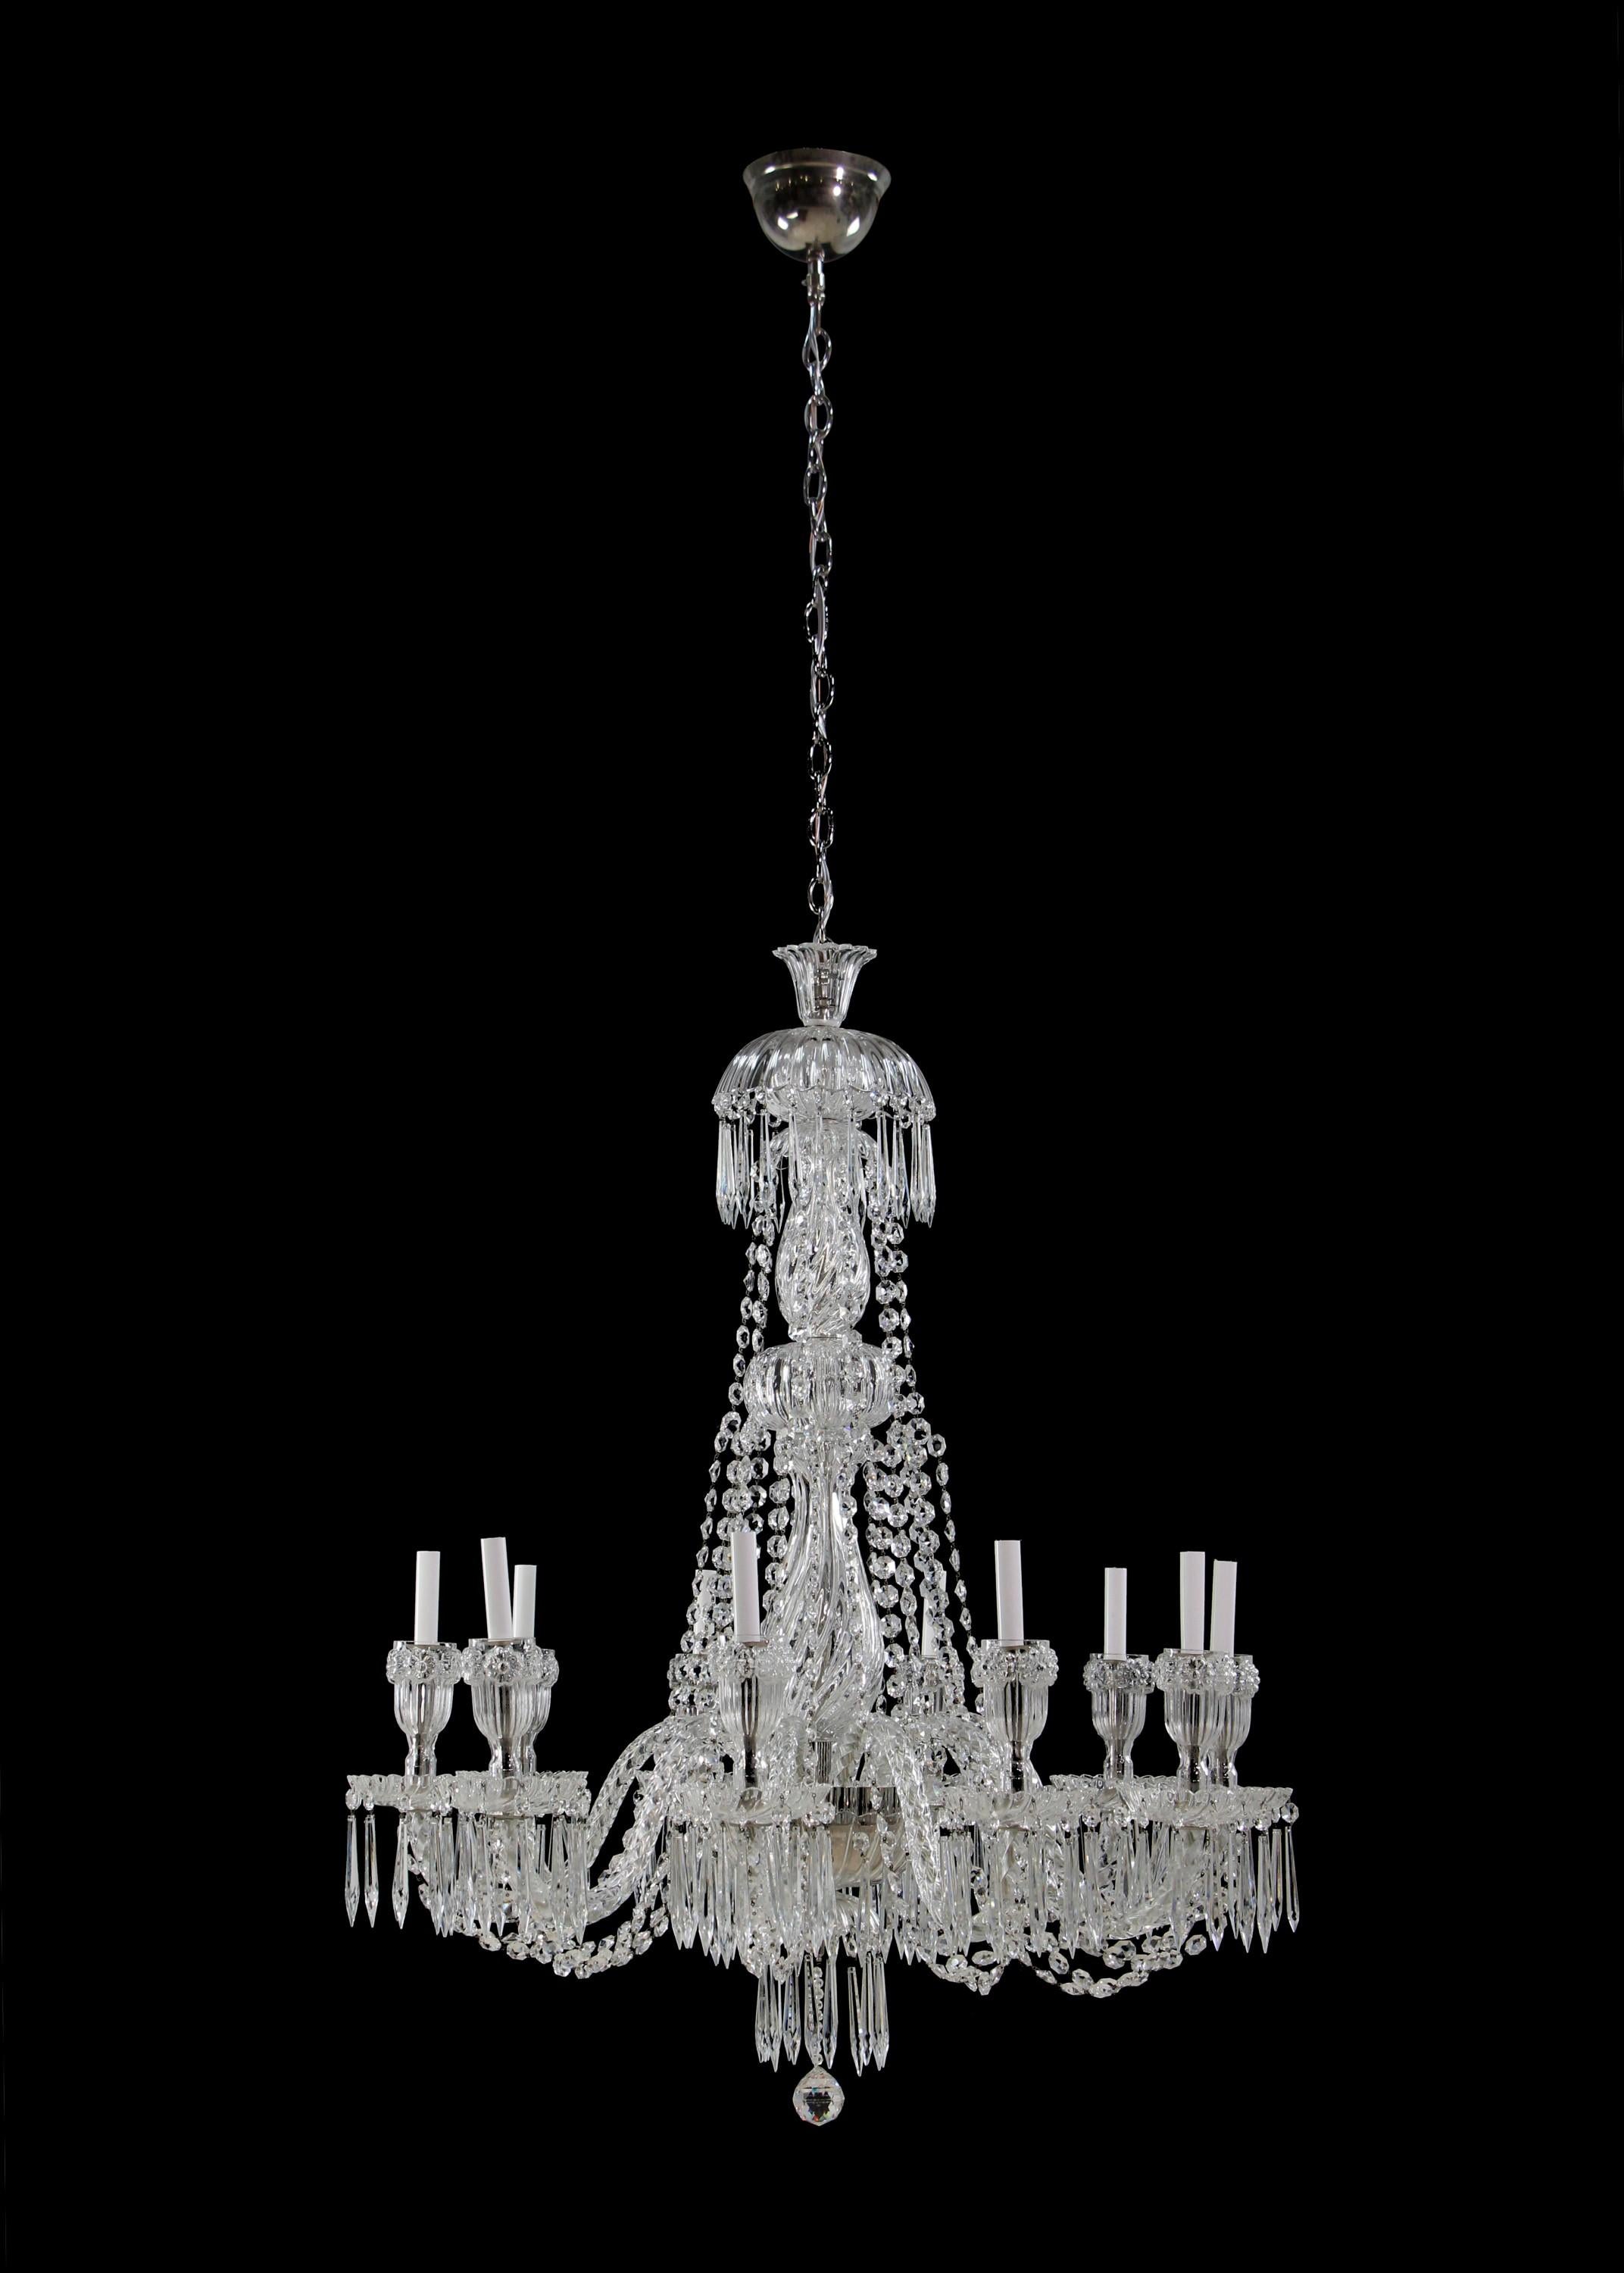 20th century over the top 12 light crystal chandelier. Features braided crystal arms, crystal swags looping from arm to arm, needle crystals dripping throughout and mirrored ceiling canopy. Takes 12 standard chandelier light bulbs. Cleaned and